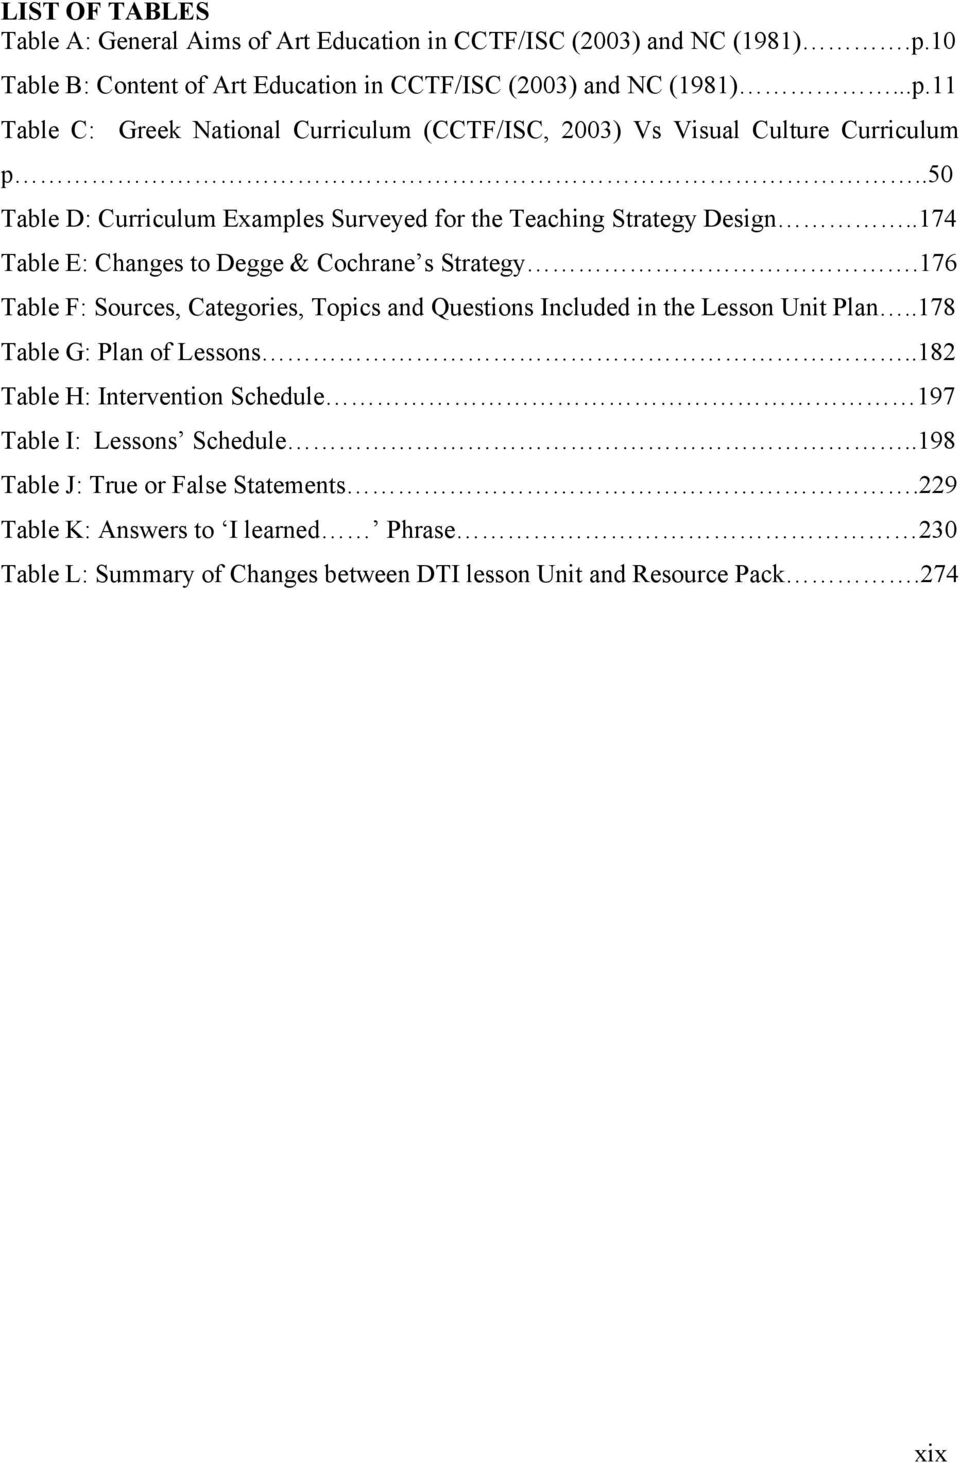 176 Table F: Sources, Categories, Topics and Questions Included in the Lesson Unit Plan..178 Table G: Plan of Lessons.